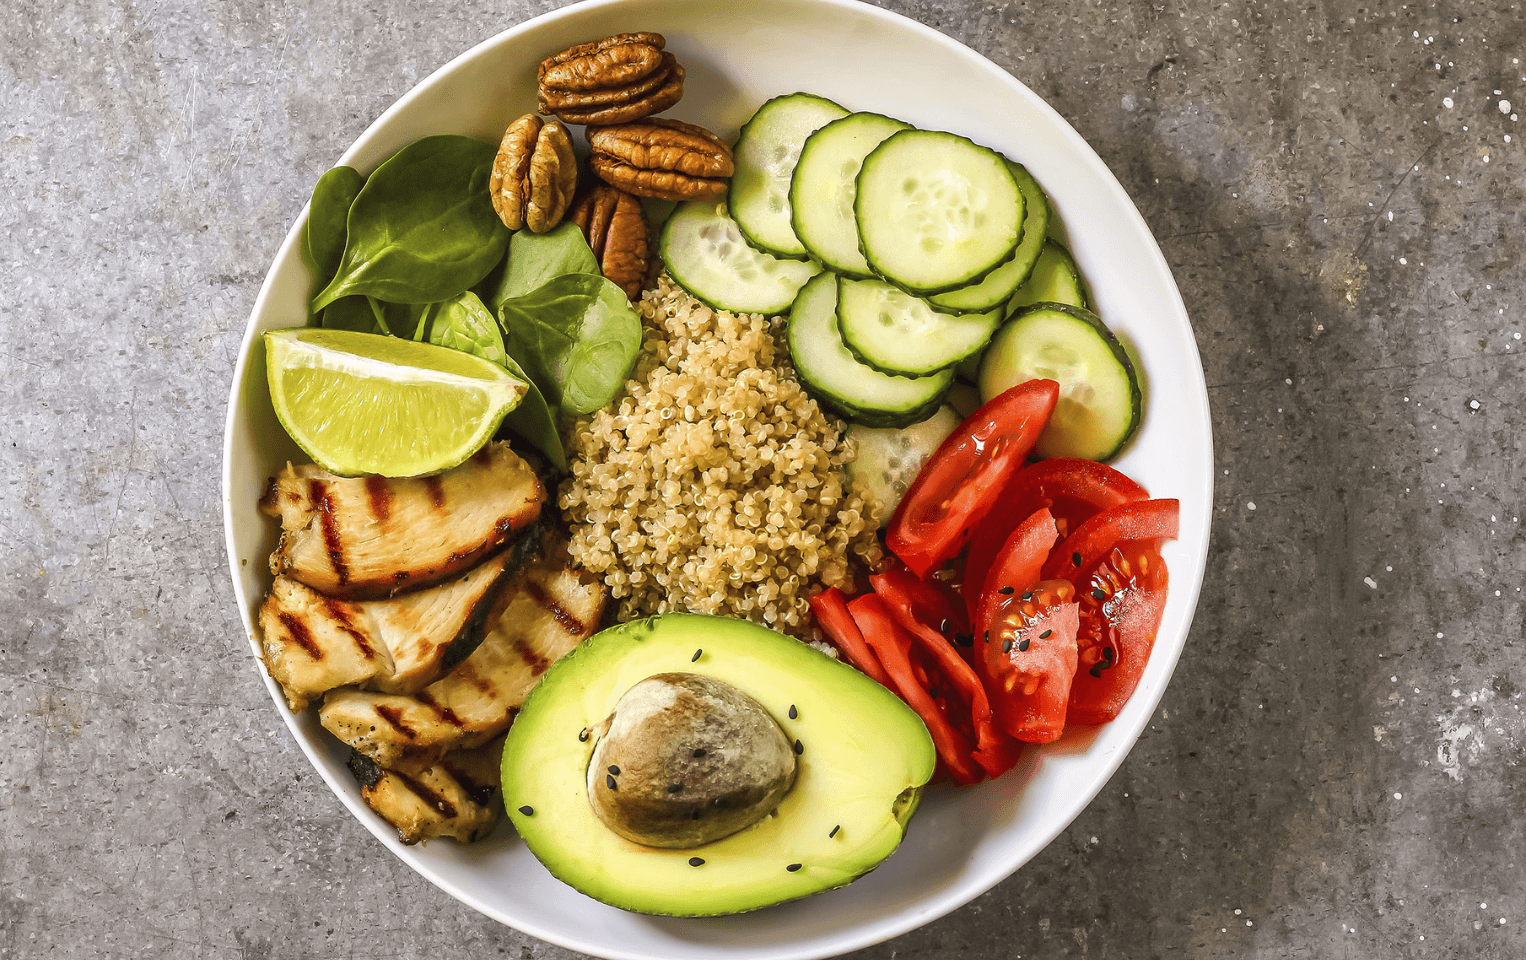 Bowl of grilled chicken quinoa salad with avocado, cucumbers, and tomatoes.